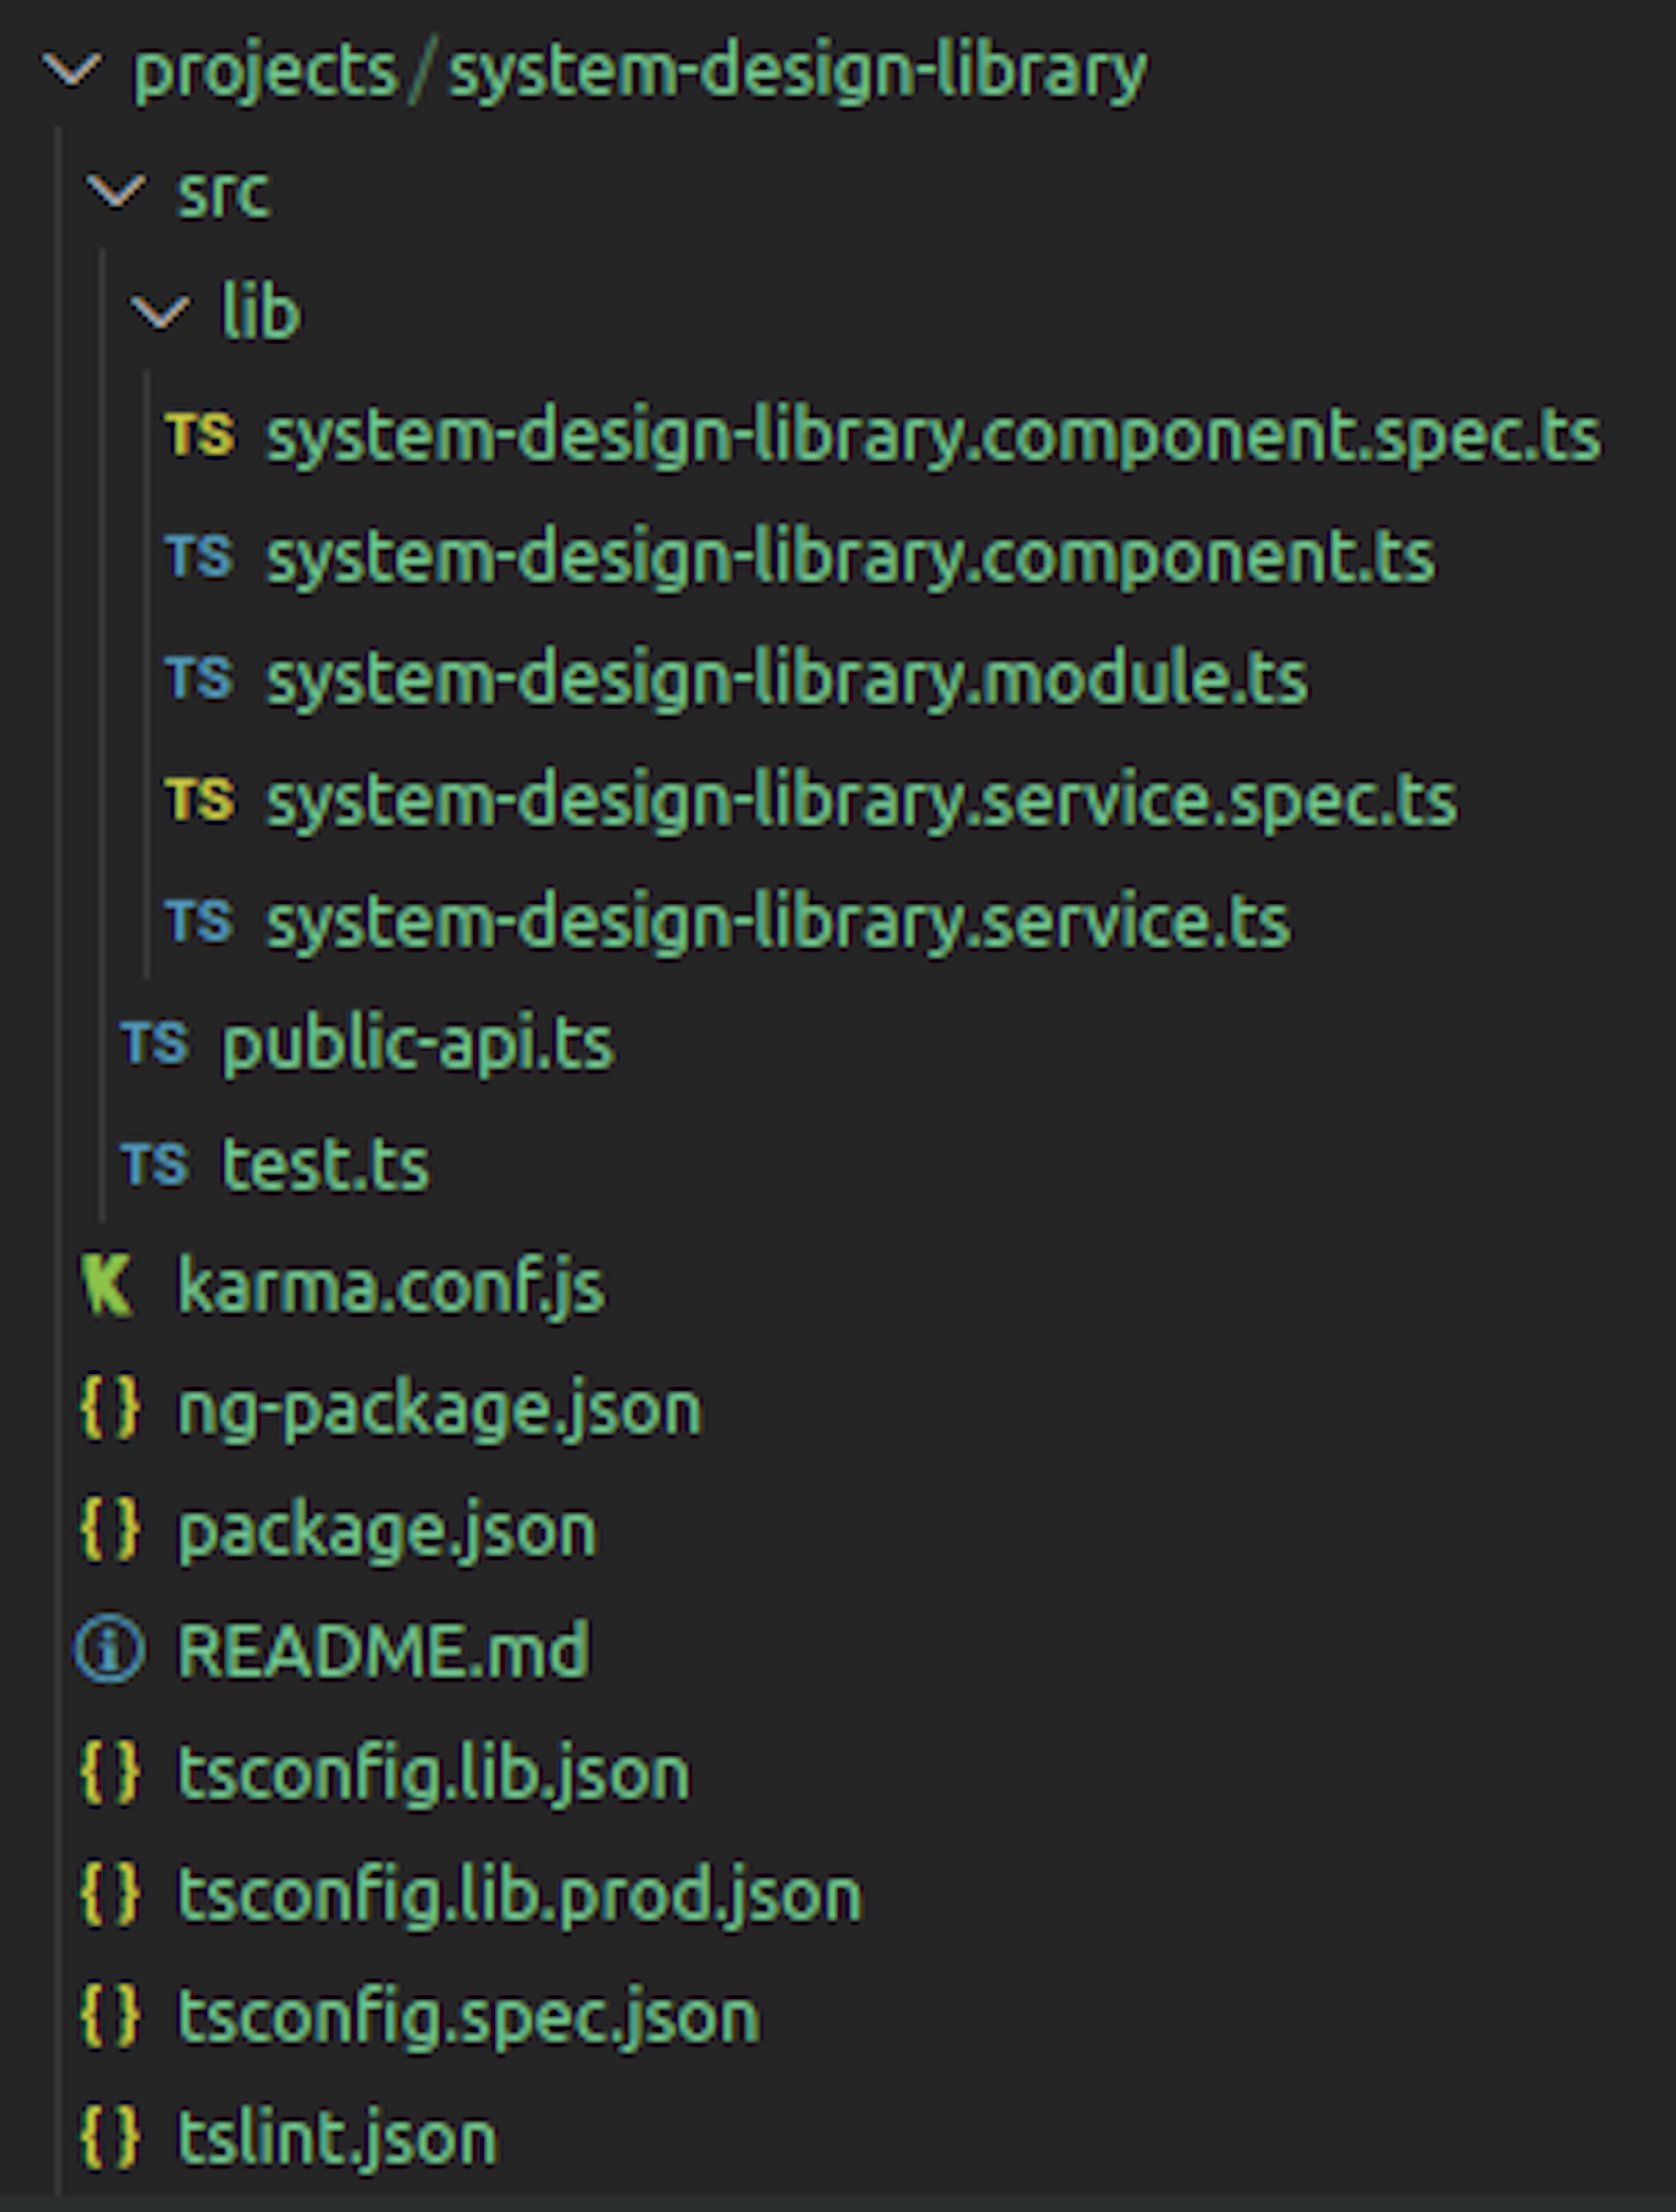 File structure of the library created.